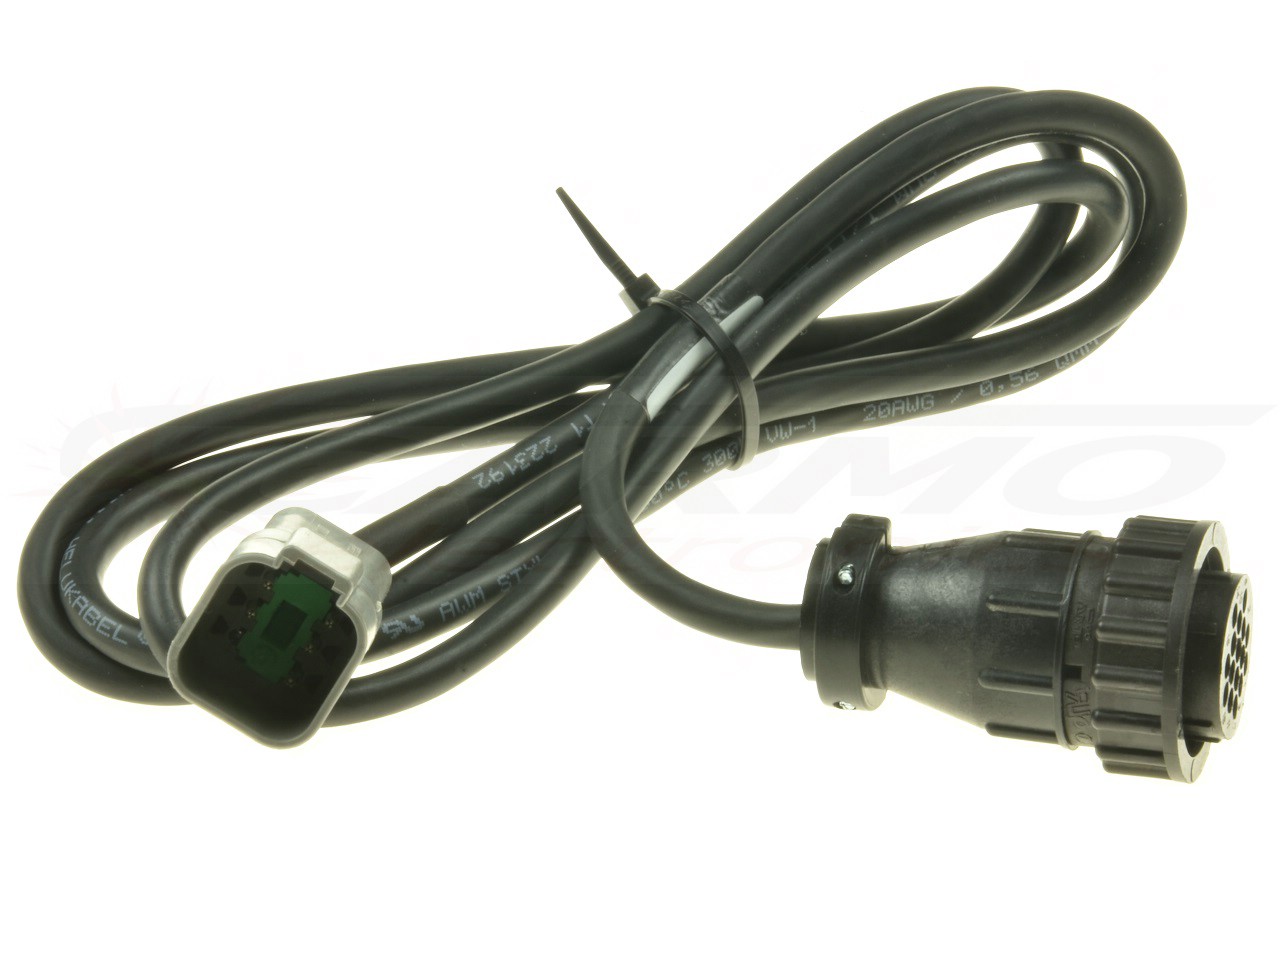 3151/AM47 BRP group Diagnostic cable for use with CAN-AM, SEA-DOO, SKI-DOO, LYNX and ROTAX diagnosis TEXA-3913320 - Click Image to Close